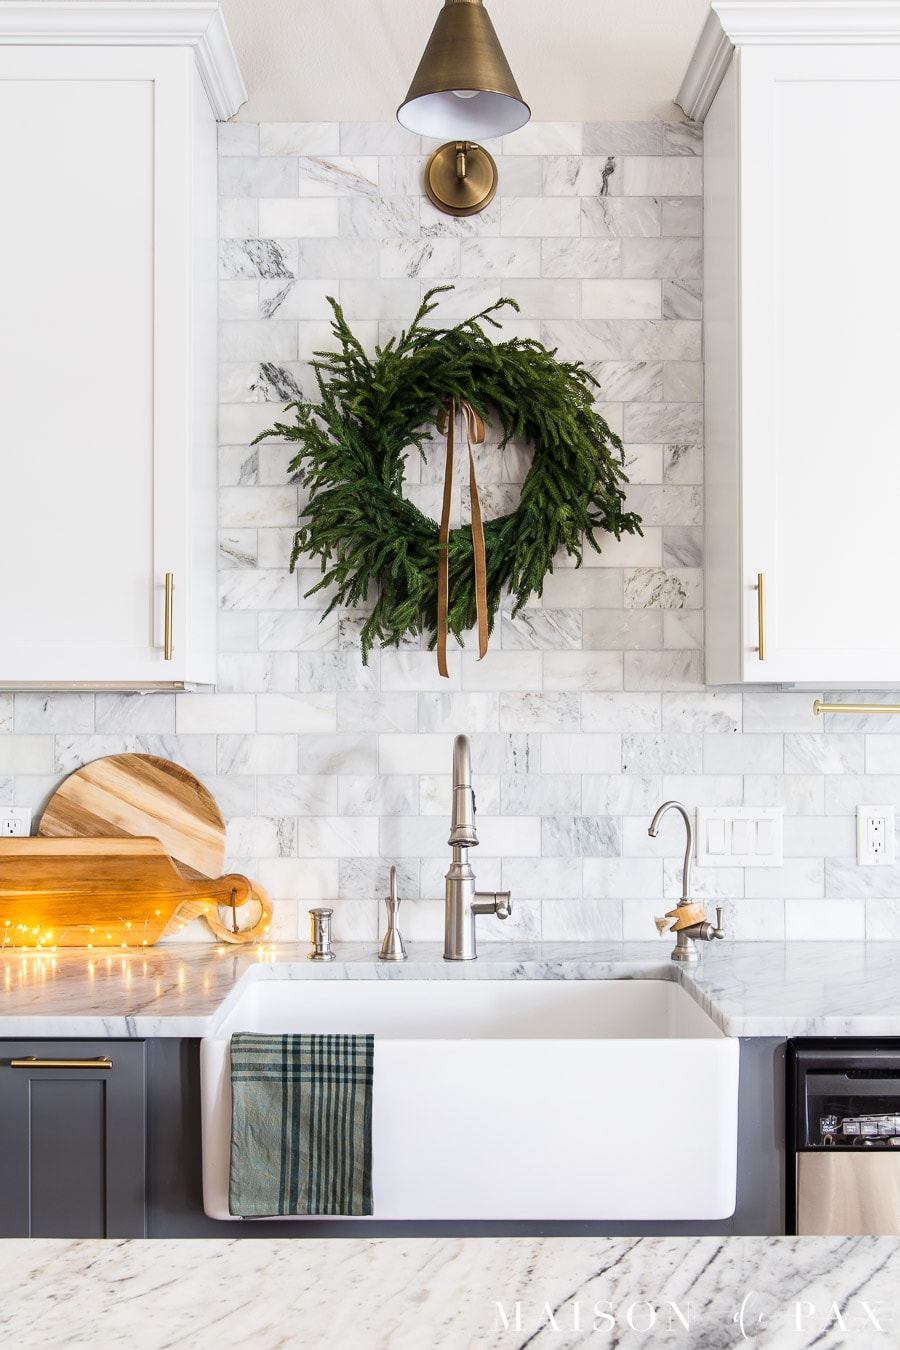 Christmas decorating ideas: pine wreath with velvet ribbon above kitchen sink